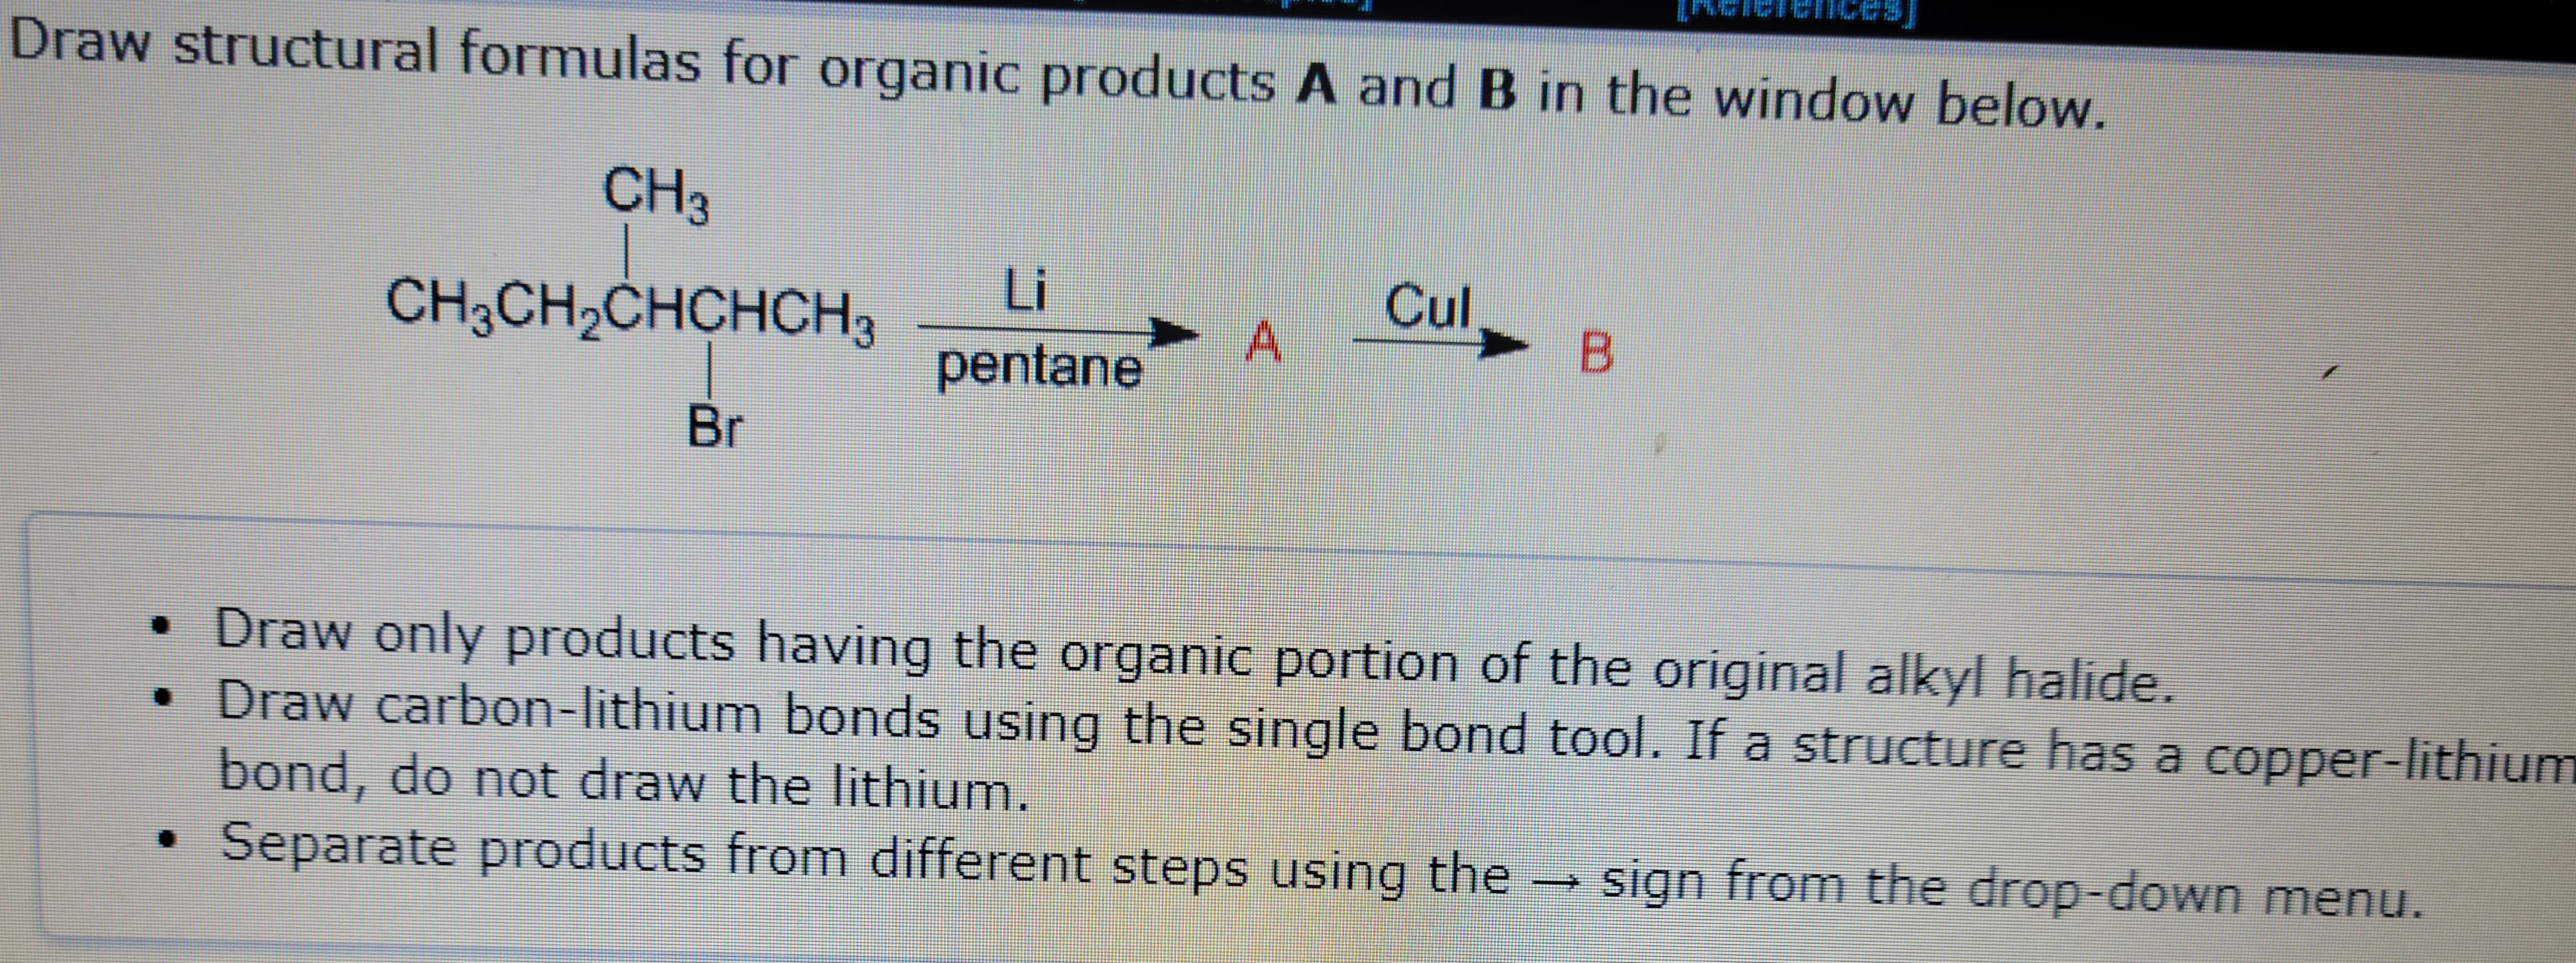 Draw structural formulas for organic products A and B in the window below.
CH3
CH3CH₂CHCHCH3
Br
Li
pentane
A
Cul
B
• Draw only products having the organic portion of the original alkyl halide.
• Draw carbon-lithium bonds using the single bond tool. If a structure has a copper-lithium
bond, do not draw the lithium.
Separate products from different steps using the → sign from the drop-down menu.